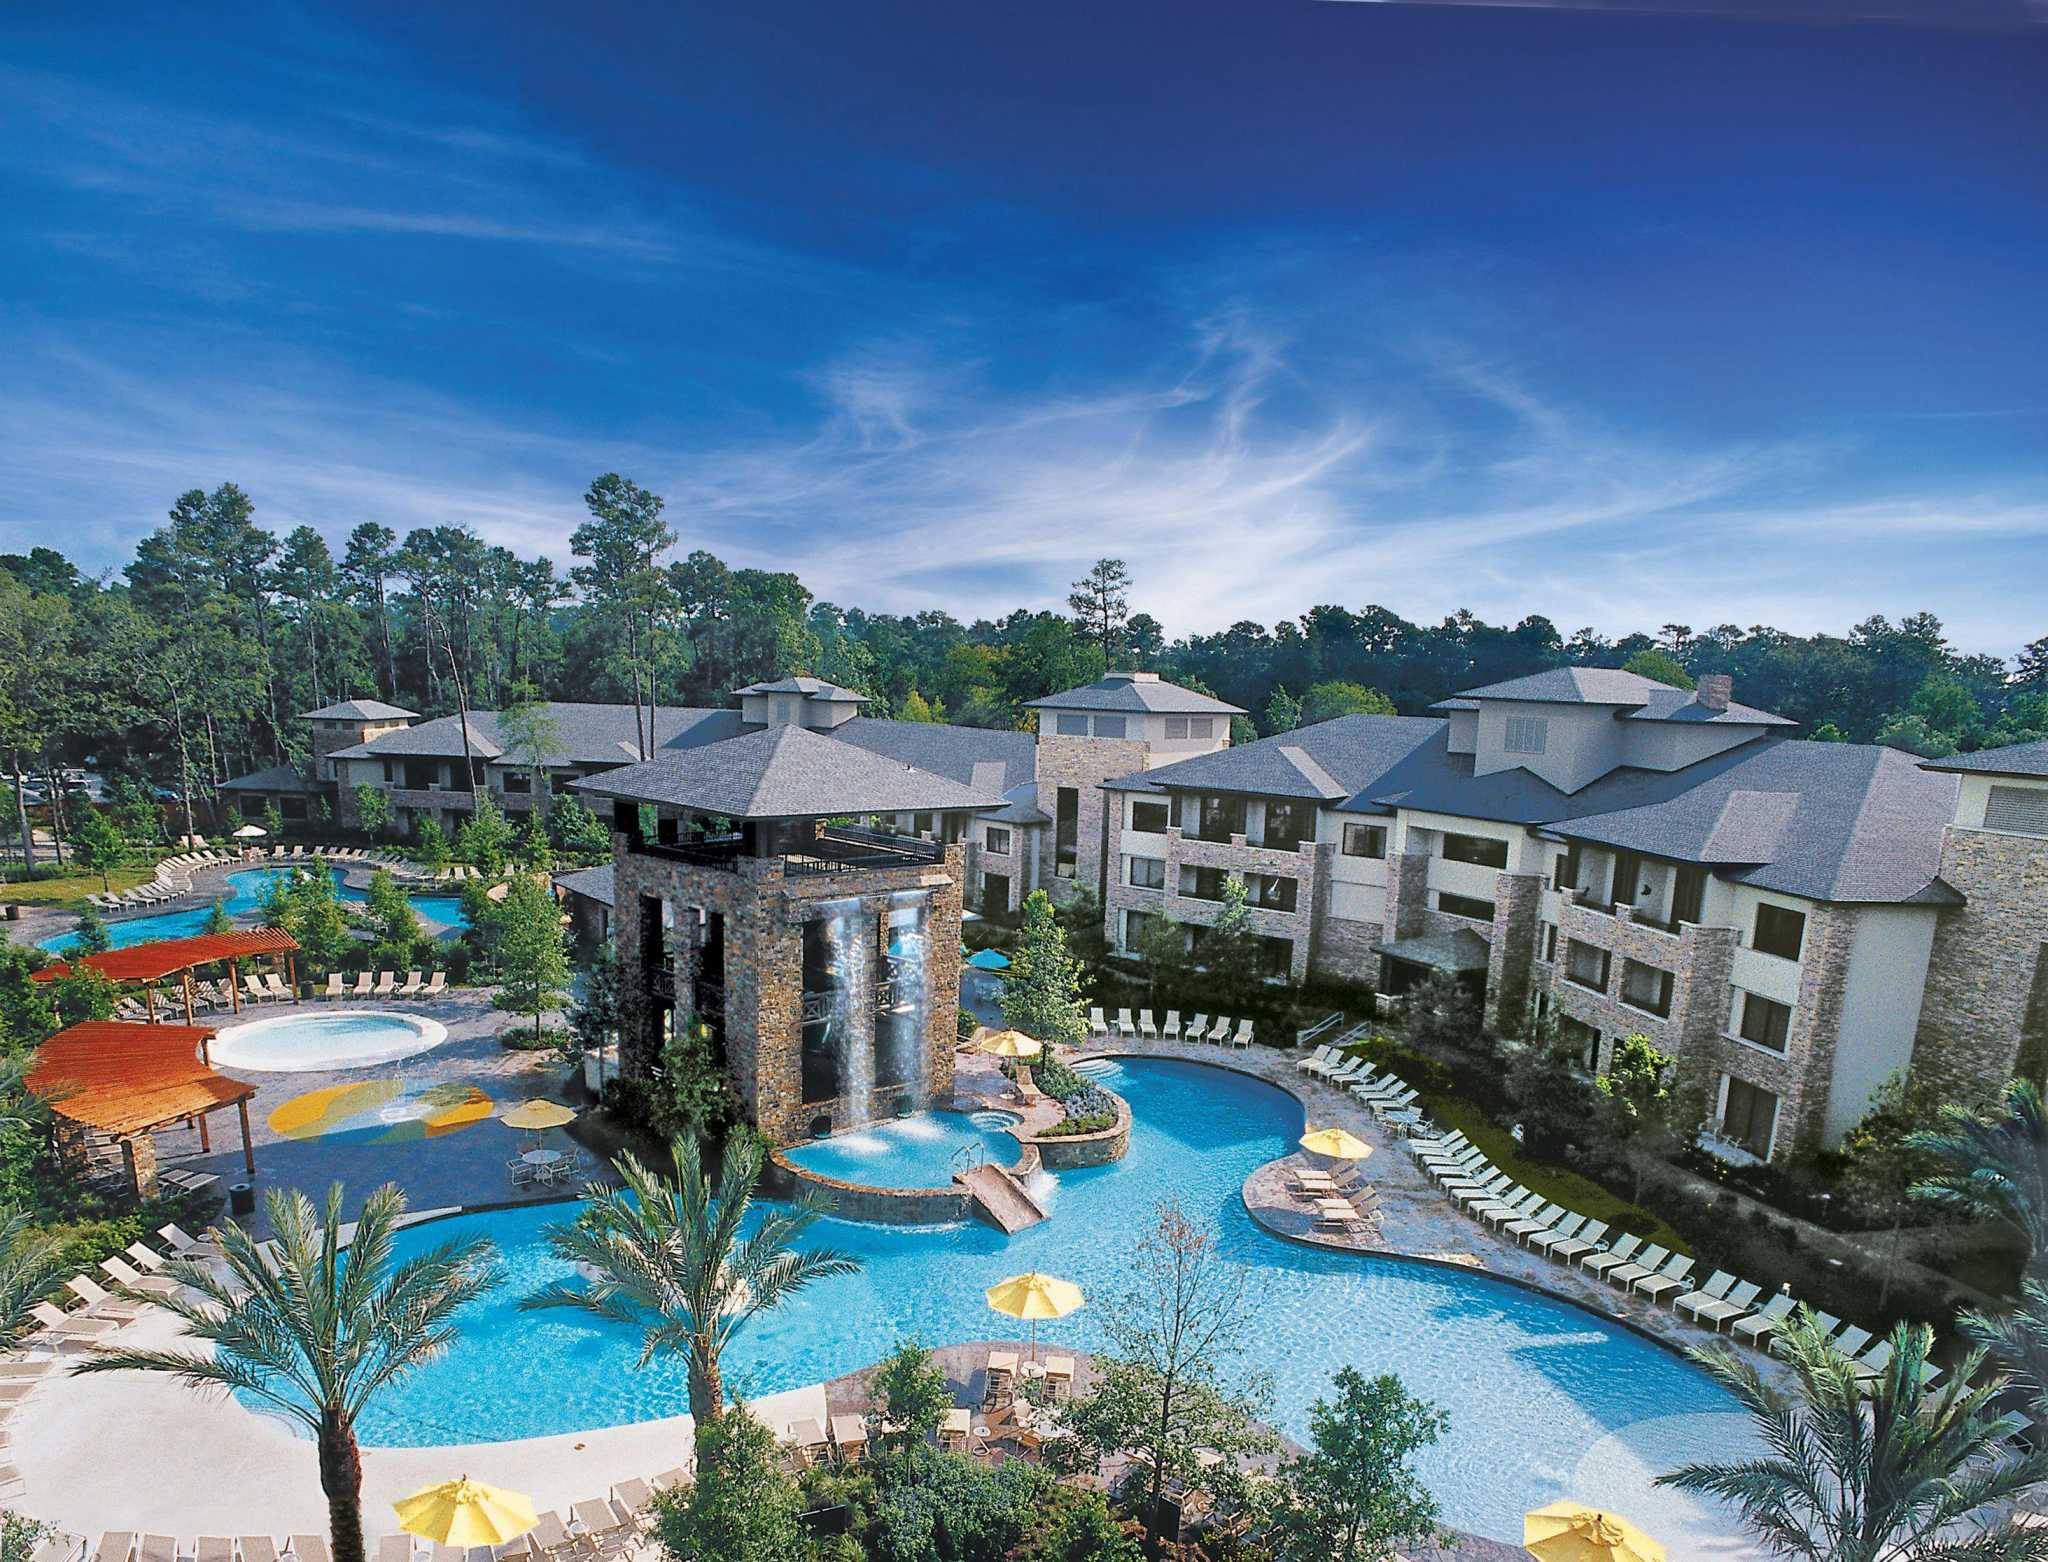 Contemporary Hotel in The Woodlands, Texas